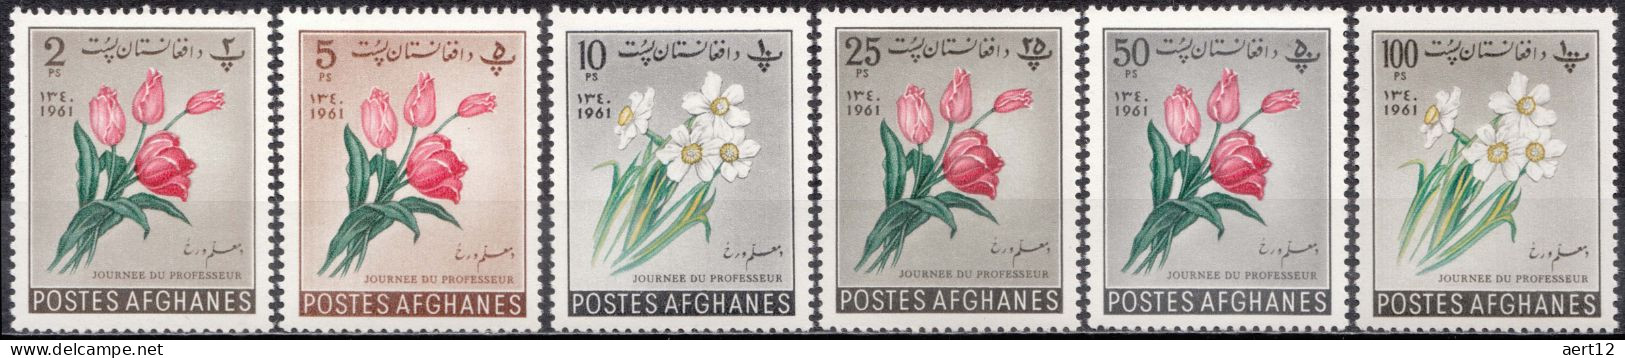 1961, Afghanistan, Teacher's Day, Tulips, Flowers, Plants, 6 Stamps, MNH(**) - Afghanistan